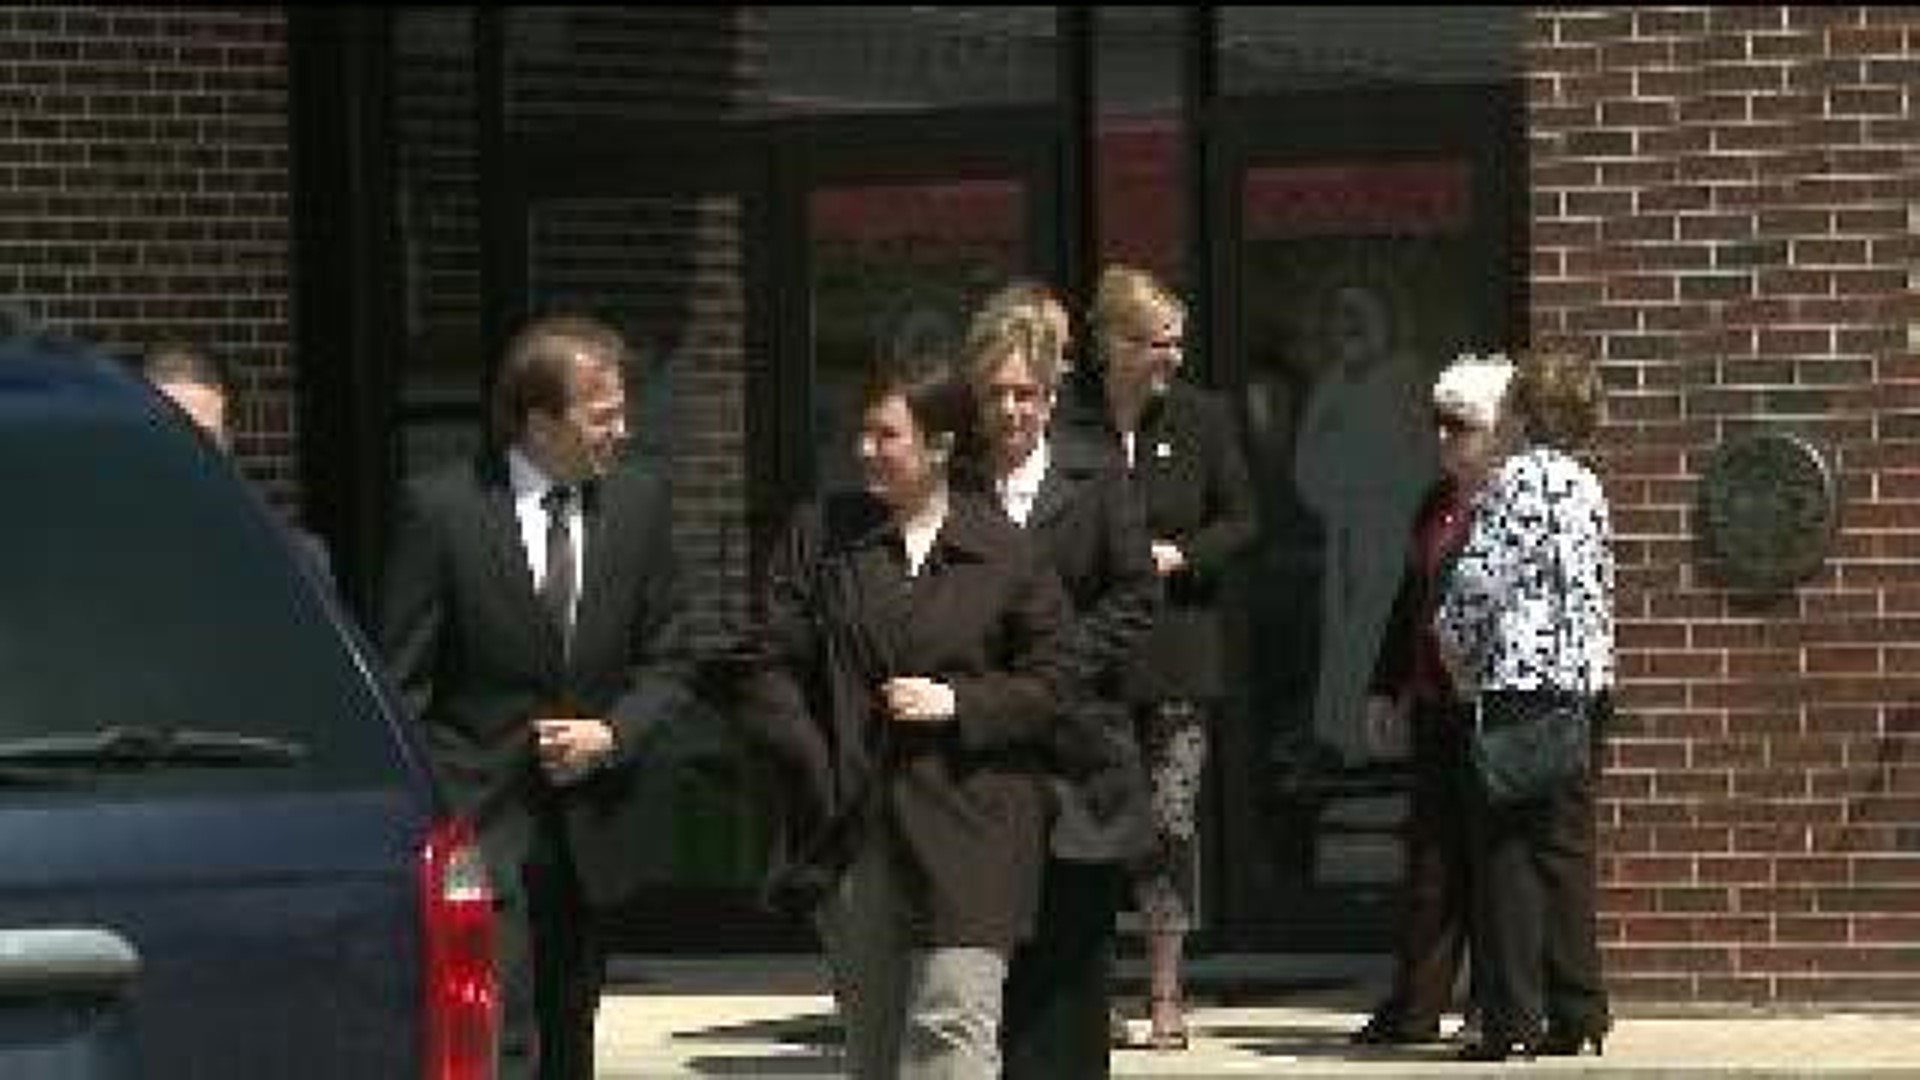 http://wnep.com/2014/04/28/final-respects-paid-to-ray-musto/